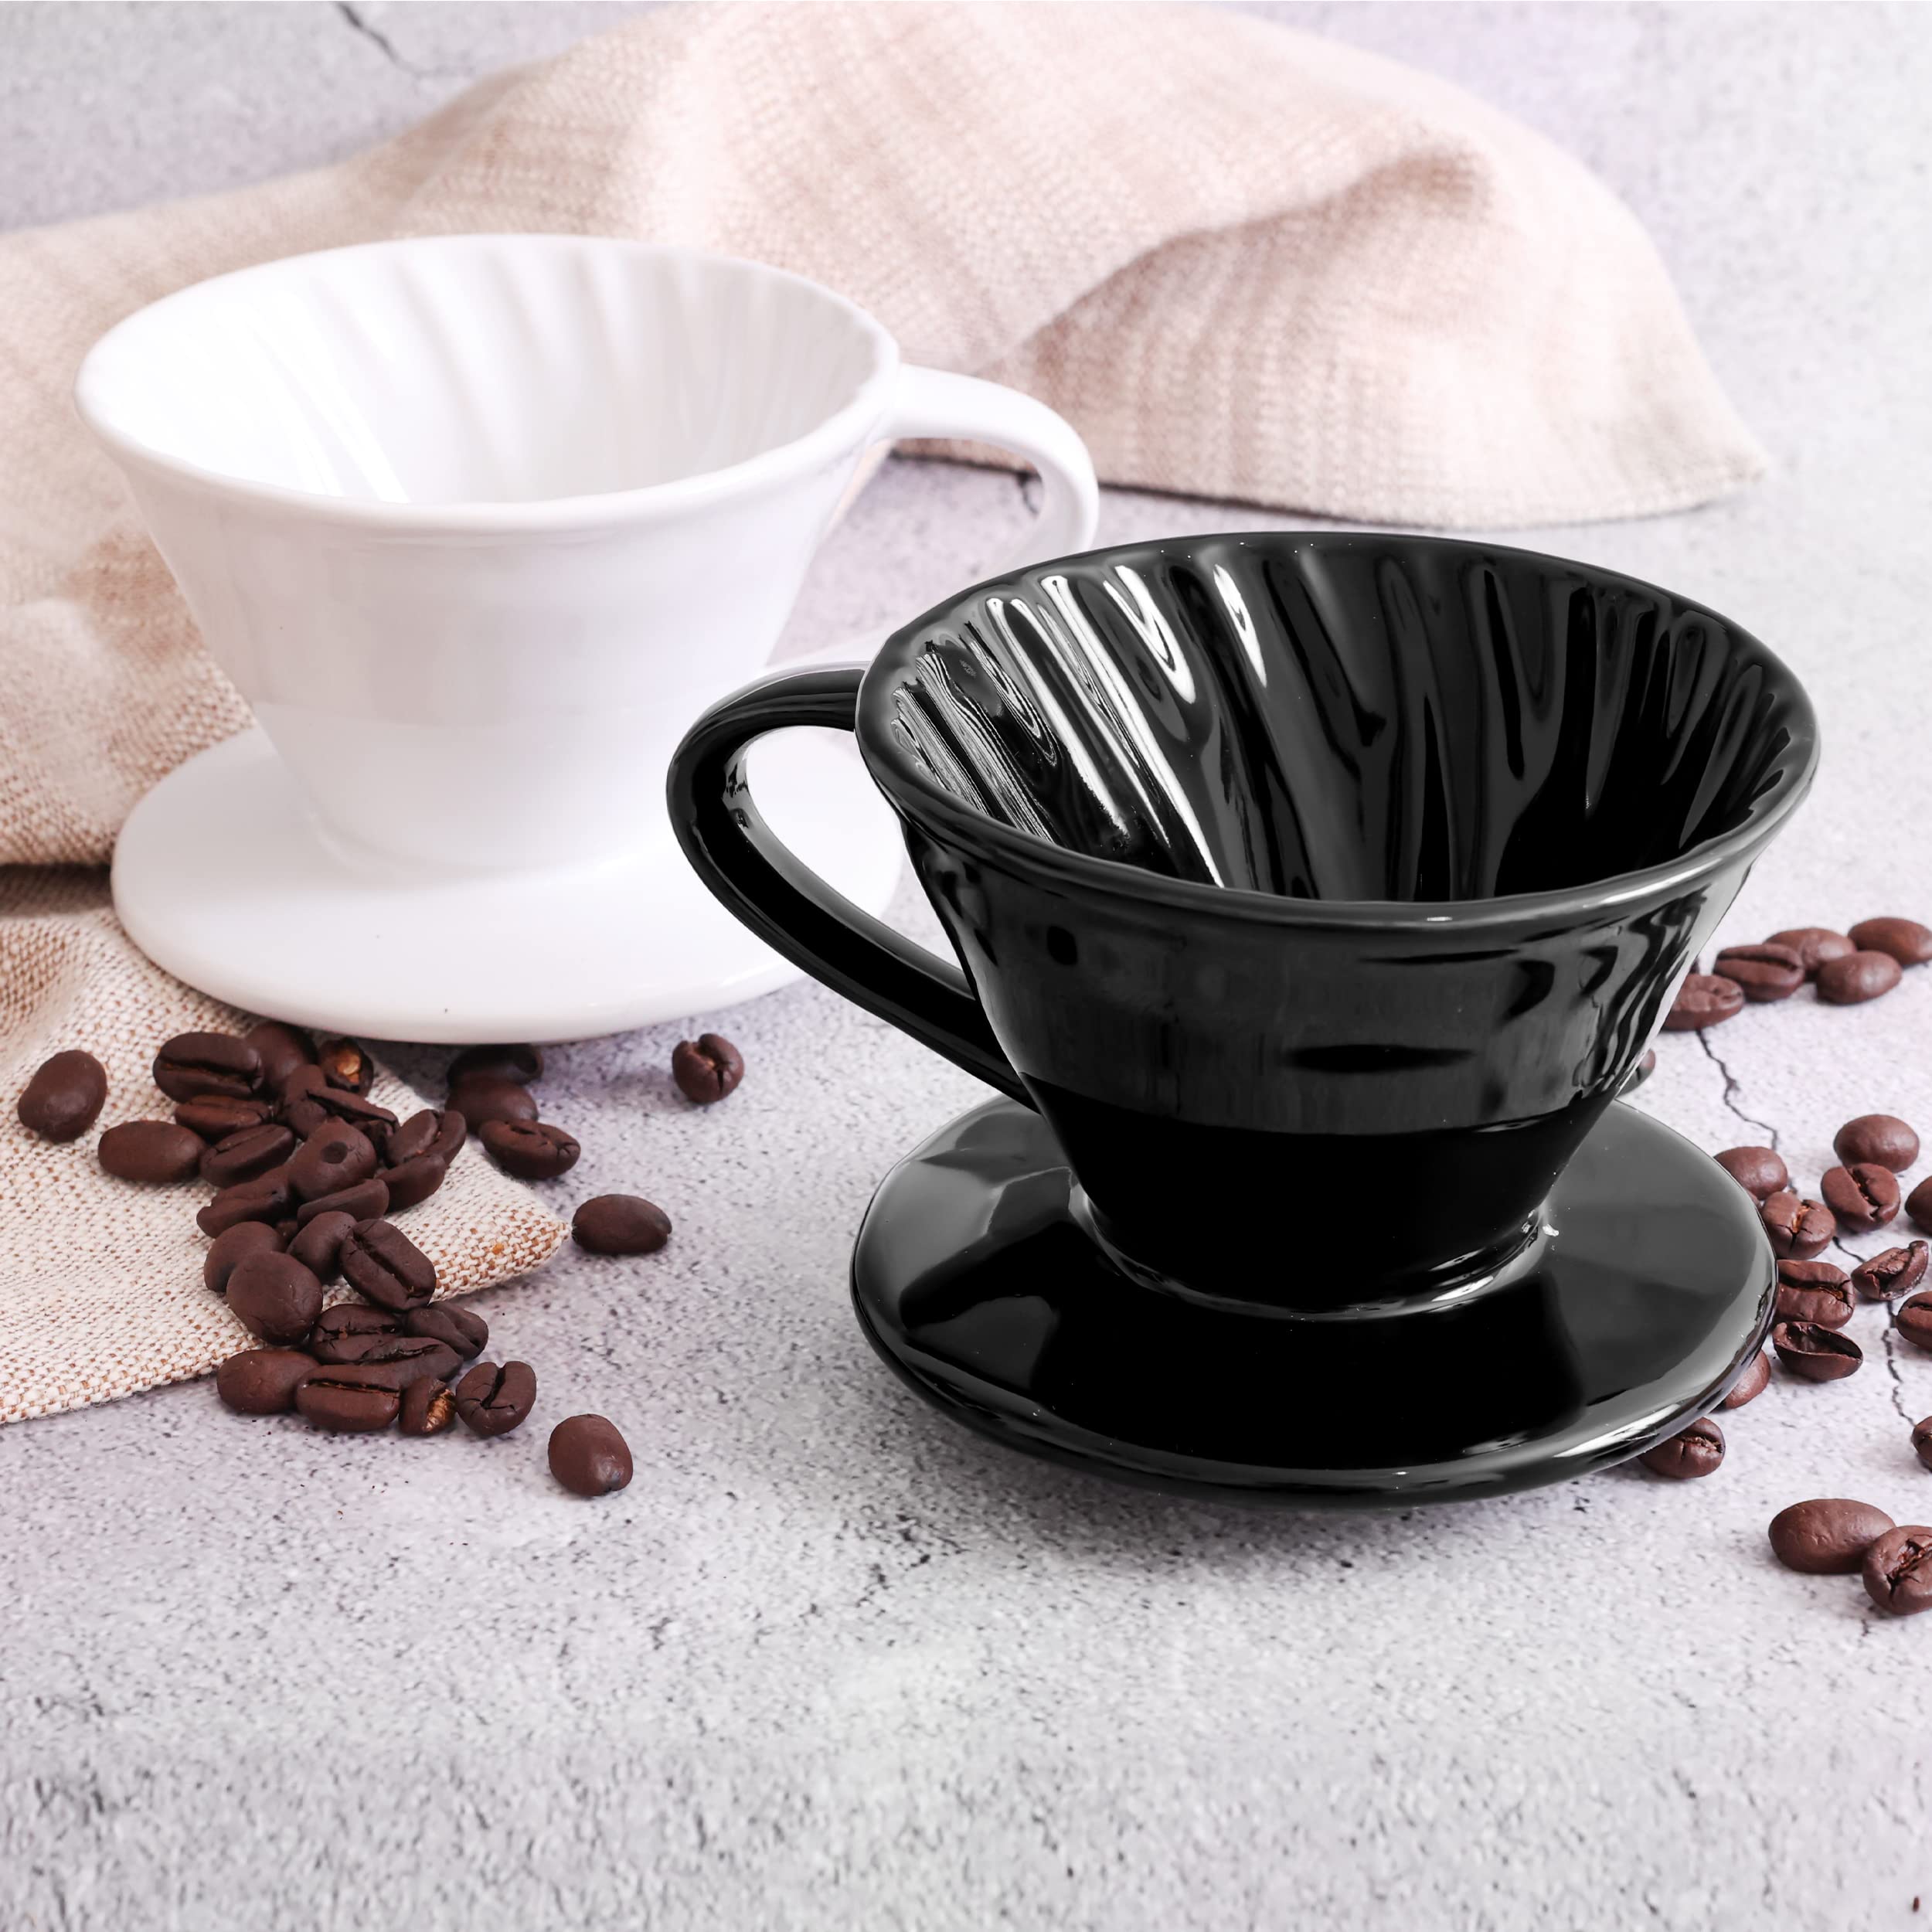 Kajava Mama Pour Over Coffee Dripper - Ceramic Slow Brewing Accessories for Home, Cafe, Restaurants - Easy Manual Brew Maker Gift - Strong Flavor Brewer - V01 or V02 Paper Cone Filters - 1 or 2 Cup  - Like New